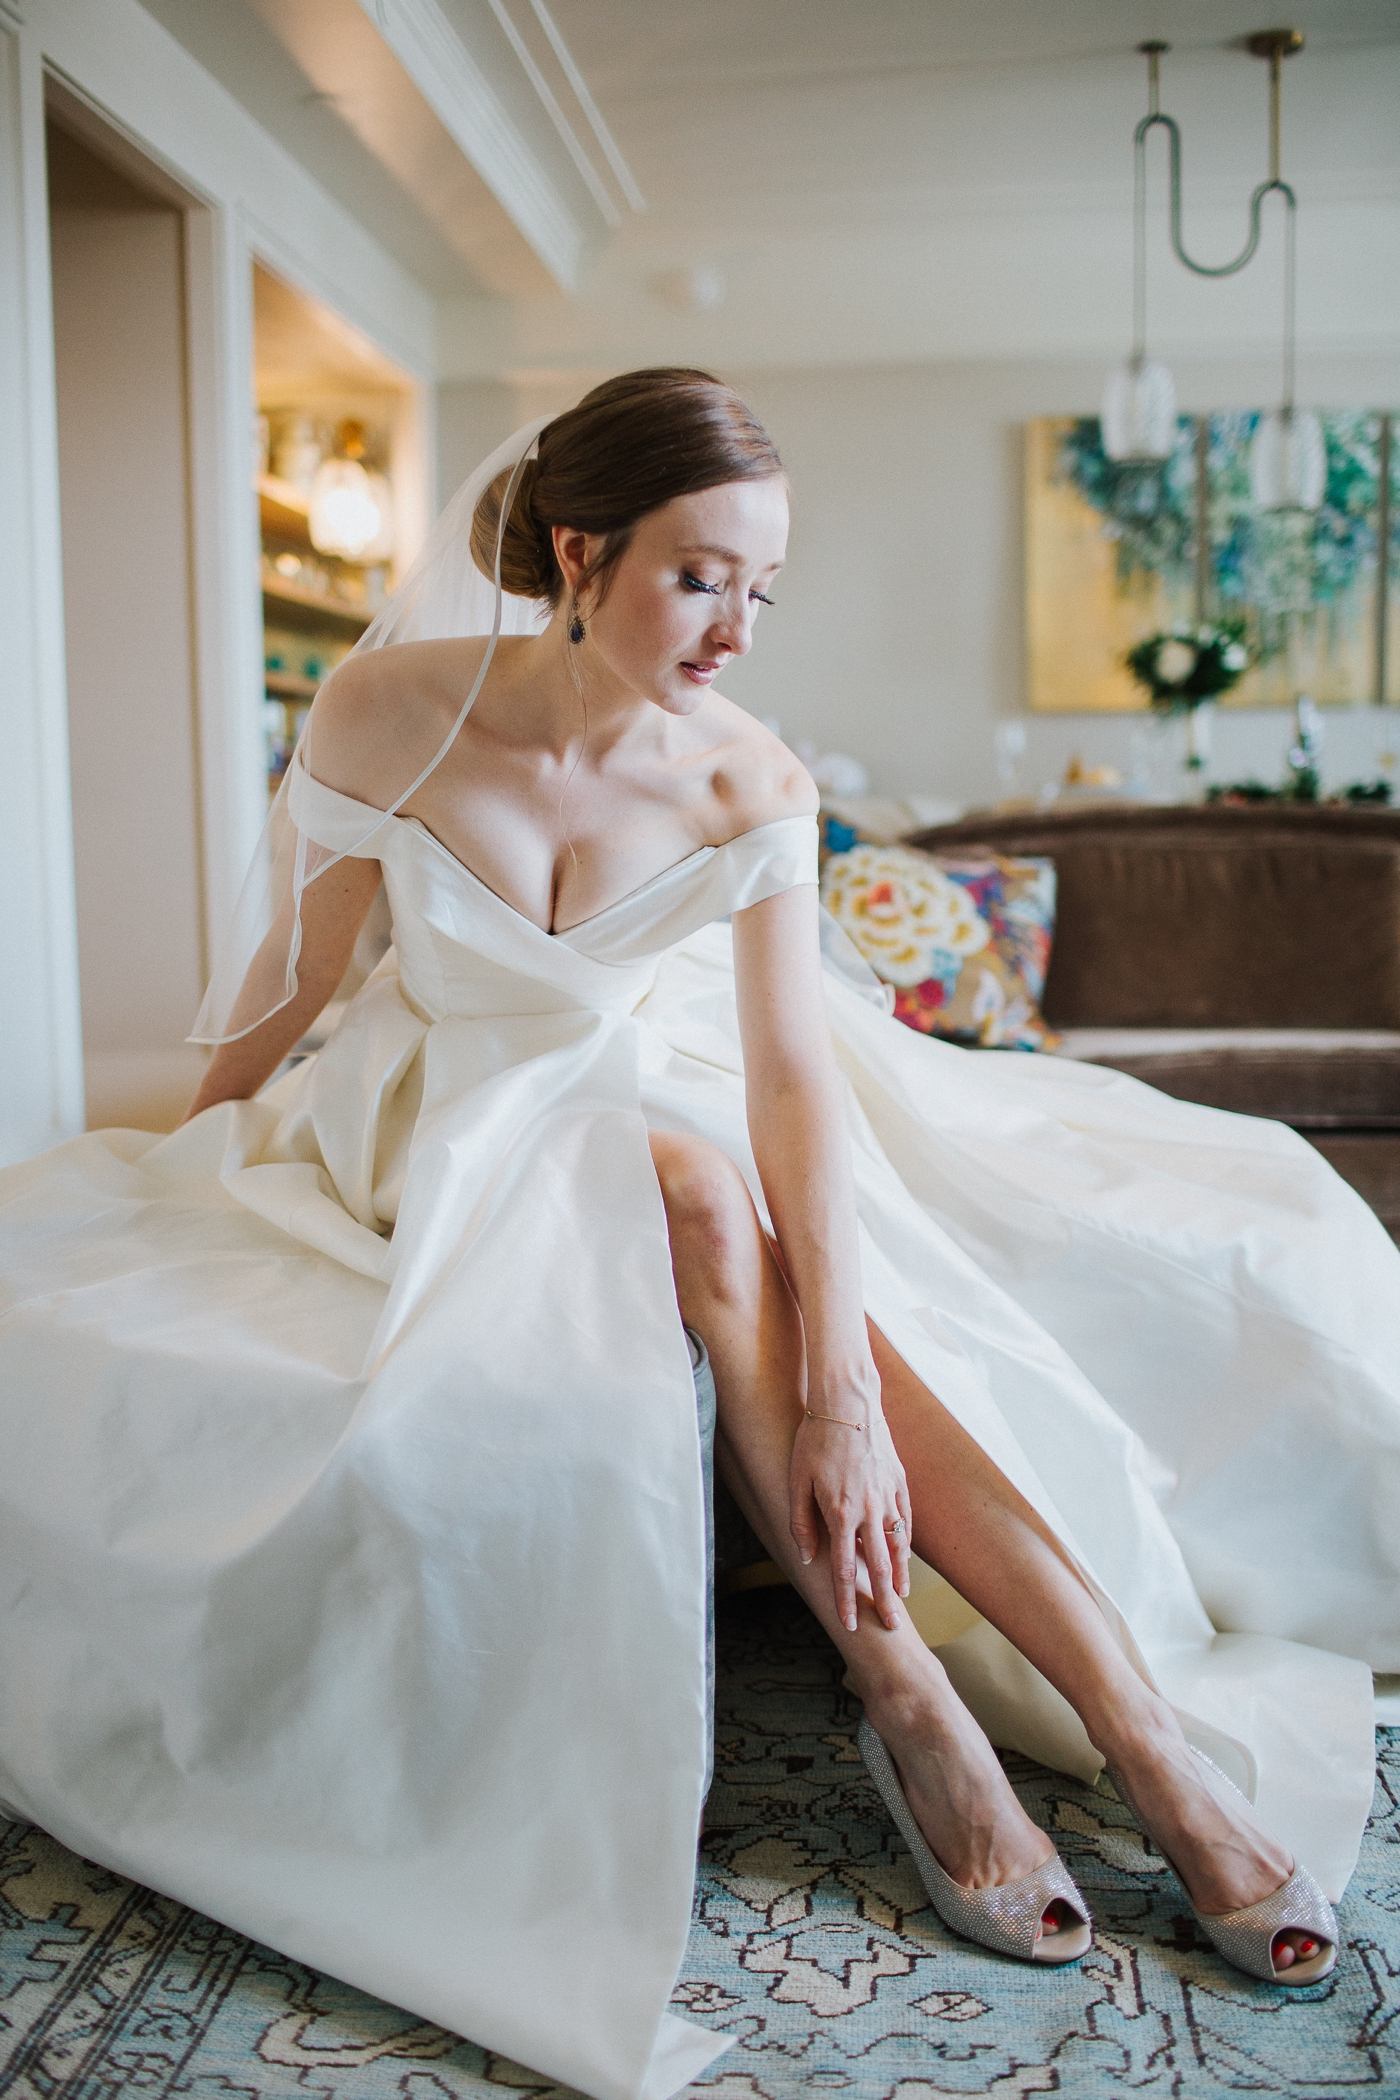 Bride in style 2811 by Tara Keely – Classic ballgown wedding dress | Izzy and Co.